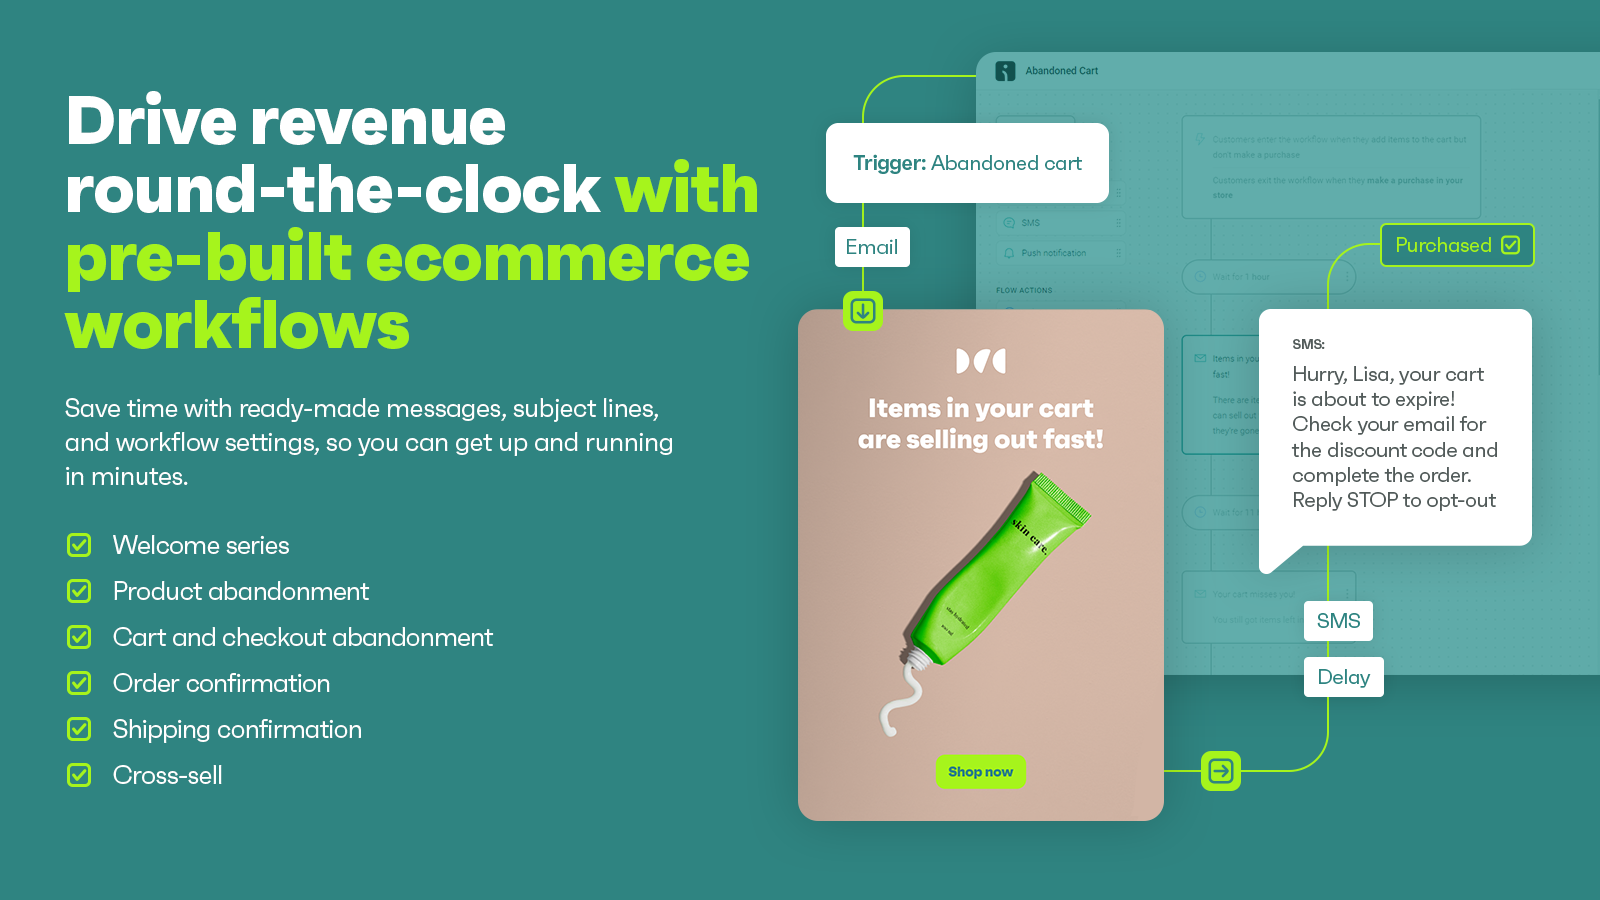 Drive revenue round-the-clock with pre-built ecommerce workflows